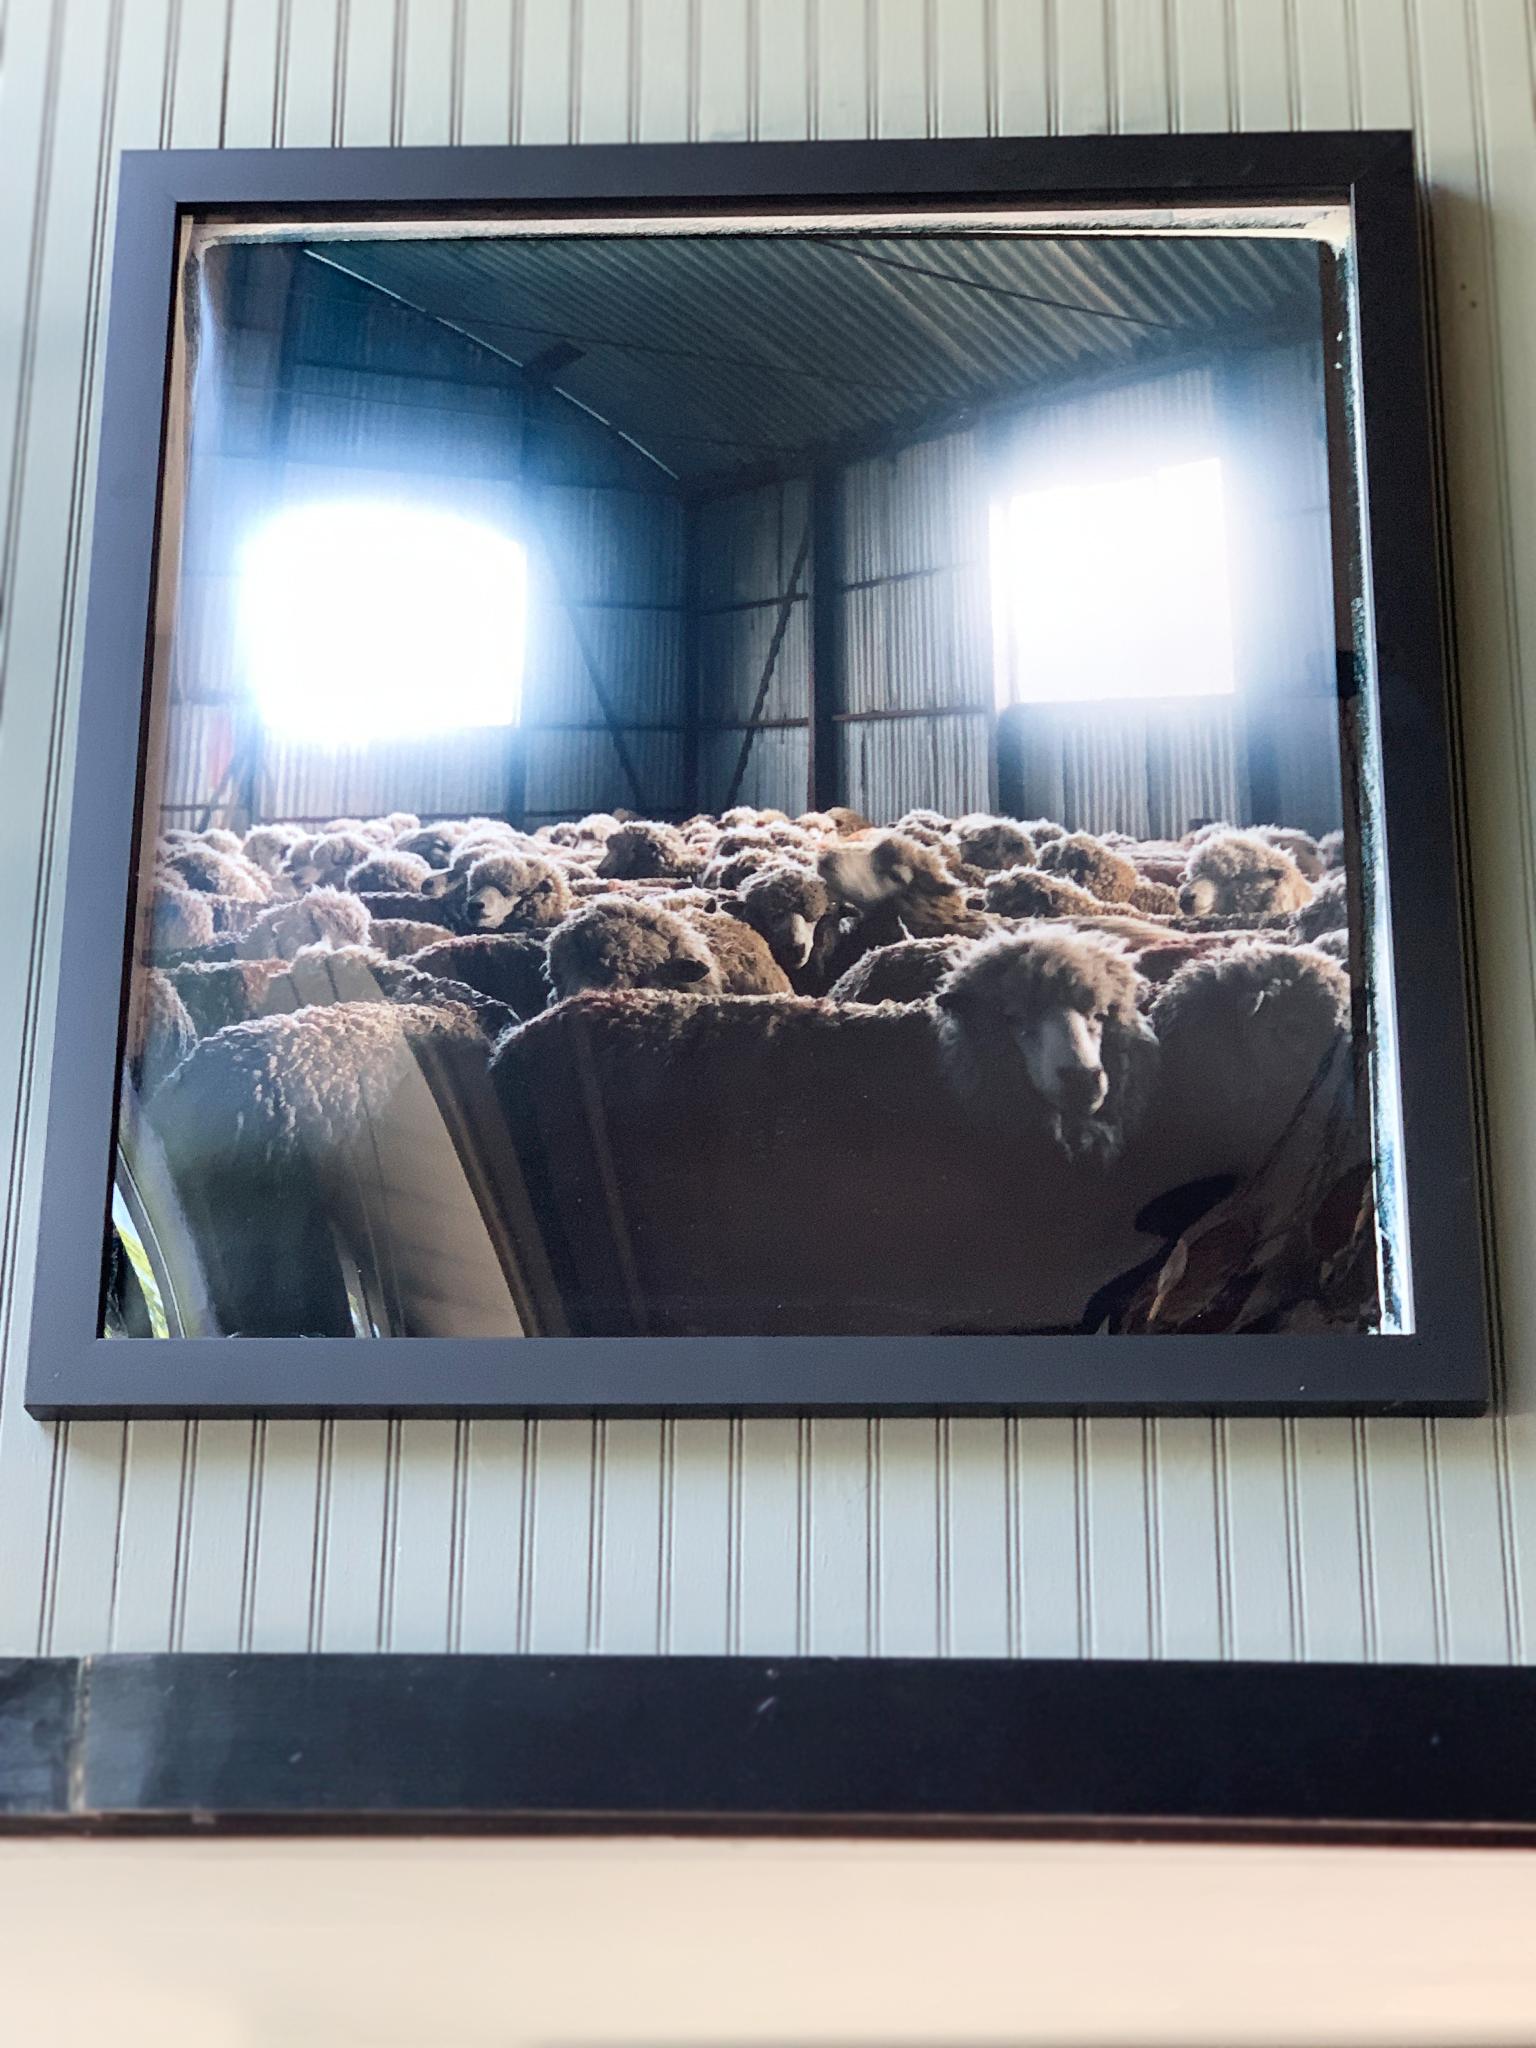 American Sheep Photograph by Michael Stuetz For Sale